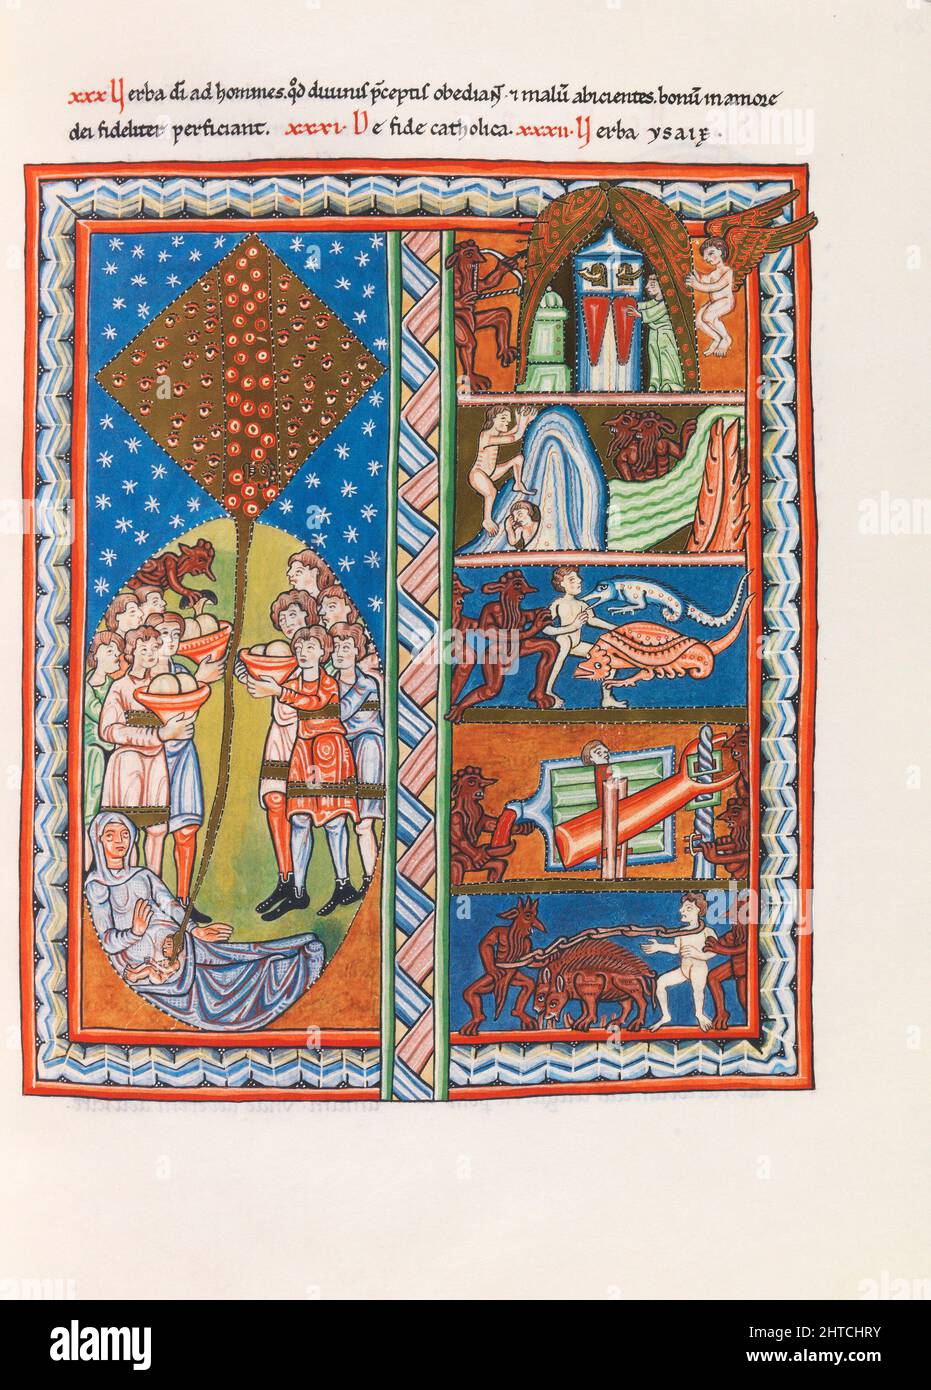 Miniature from Liber Scivias by Hildegard of Bingen, ca 1155. Private Collection. Stock Photo